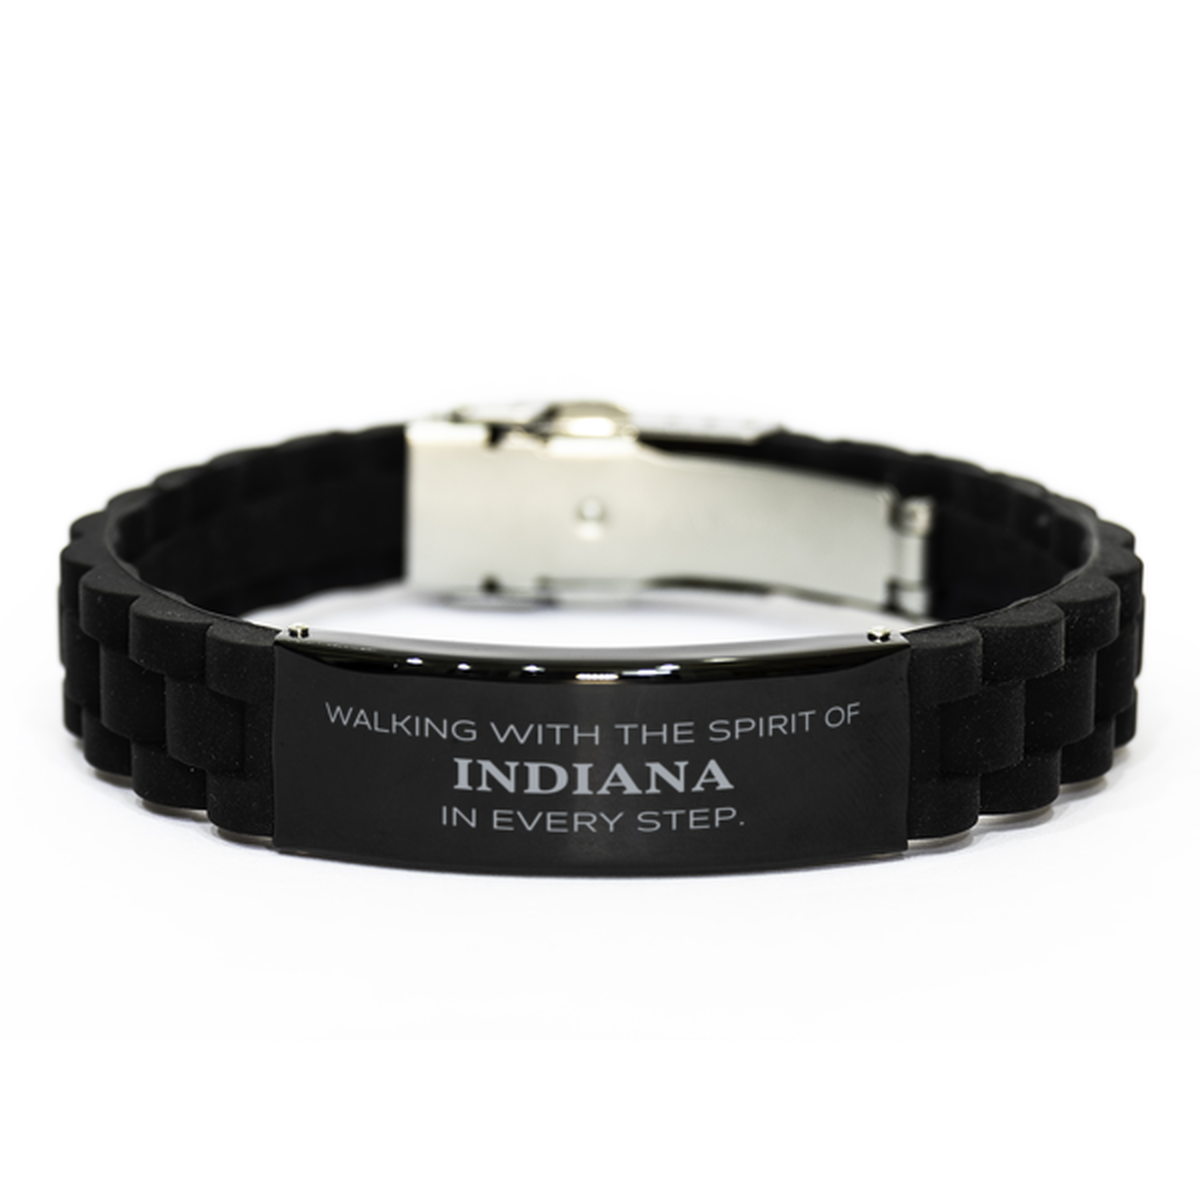 Indiana Gifts, Walking with the spirit, Love Indiana Birthday Christmas Black Glidelock Clasp Bracelet For Indiana People, Men, Women, Friends